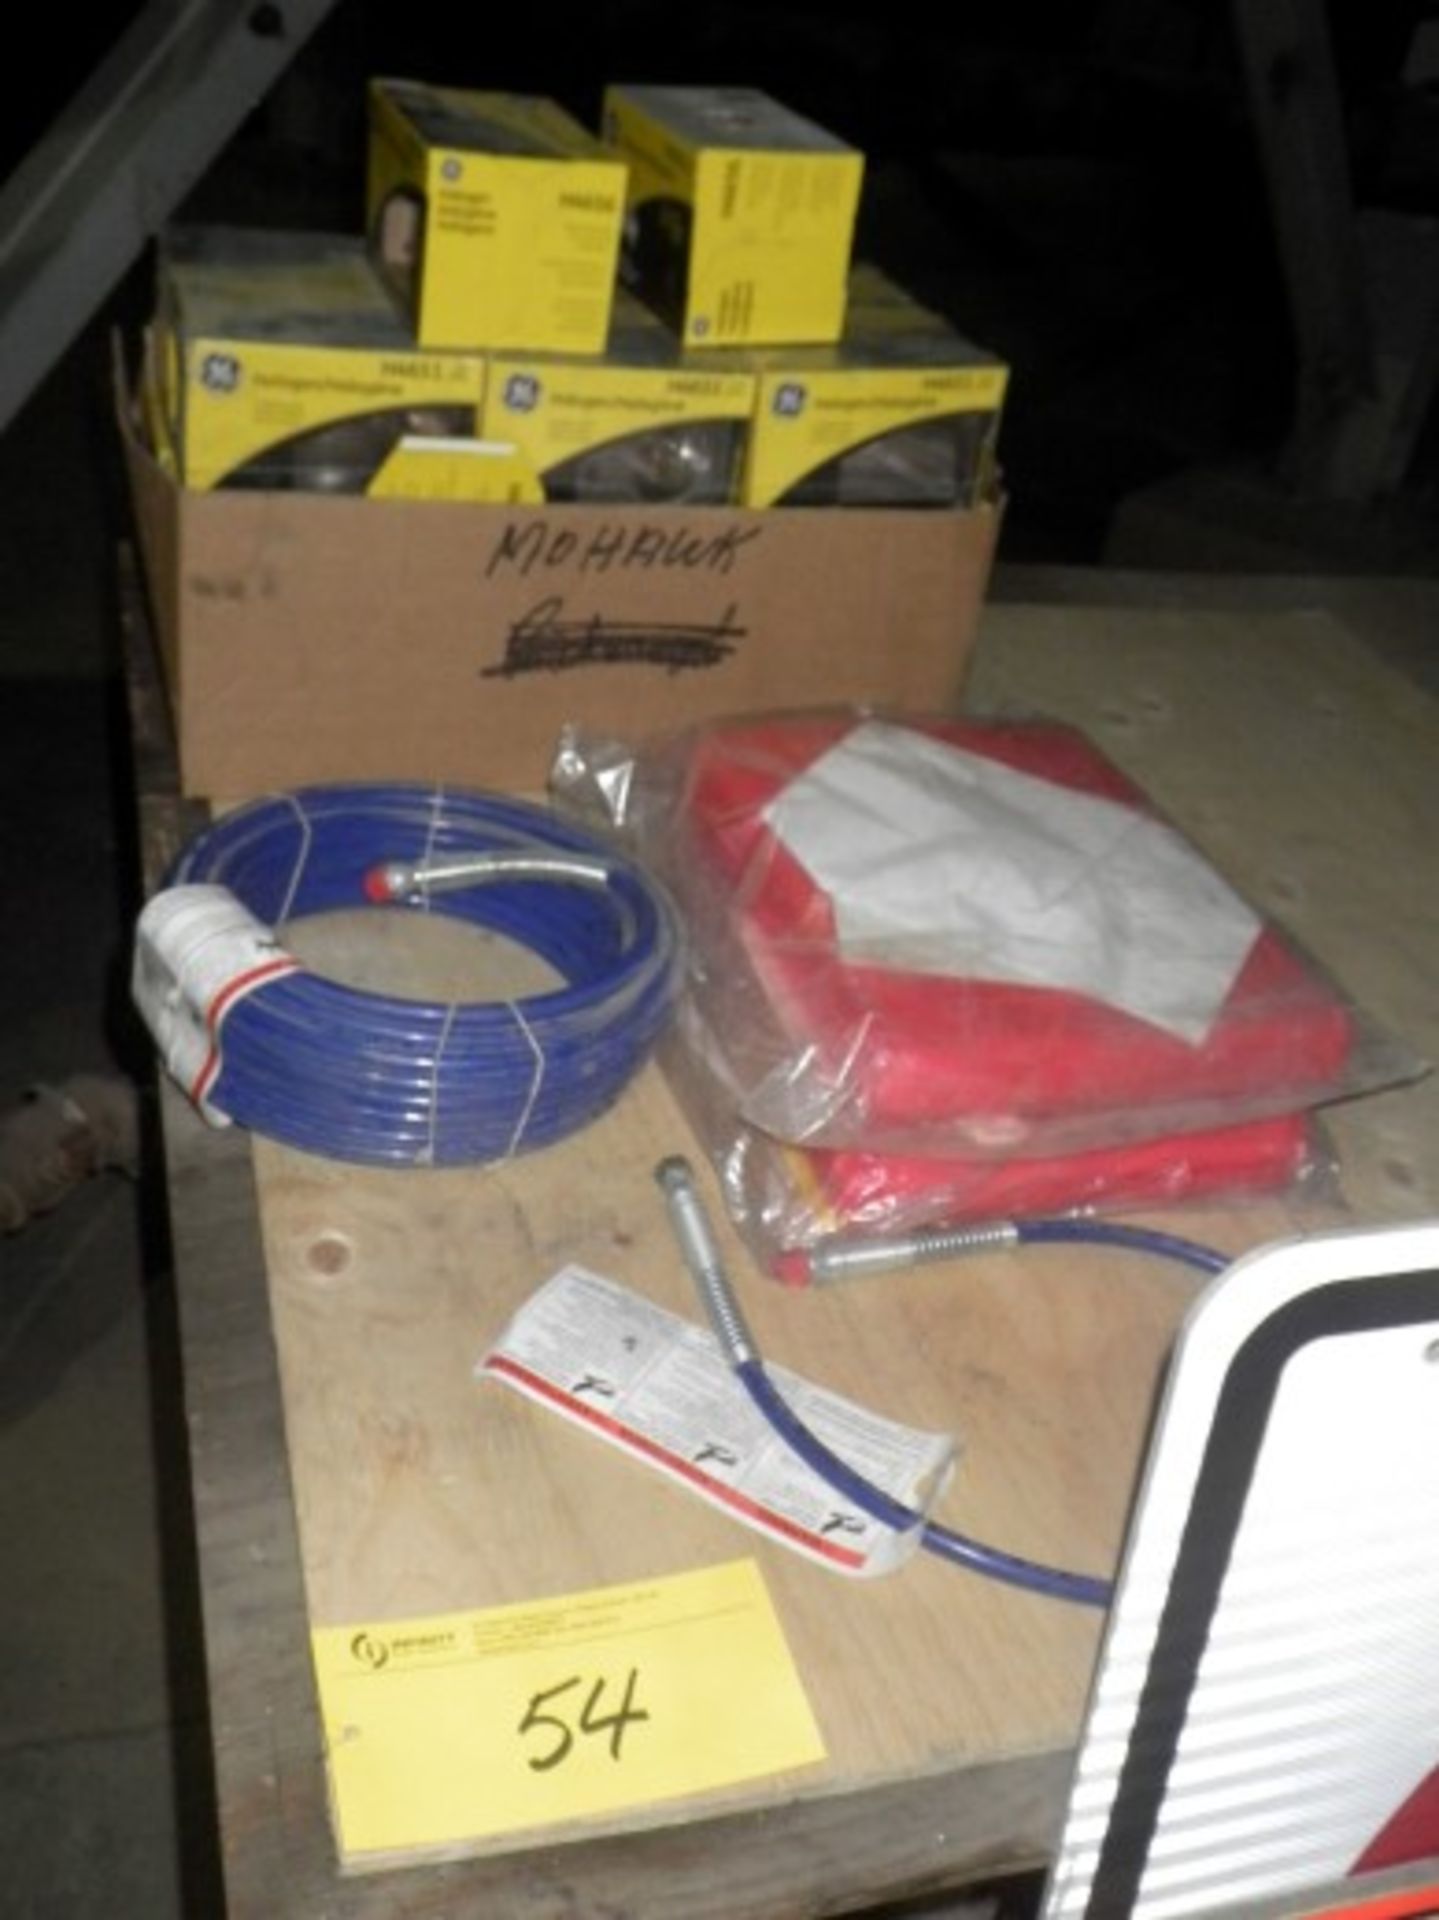 TWO Operators Logs, Air Compressor Hose and Box of Halogen Headlights (WET)